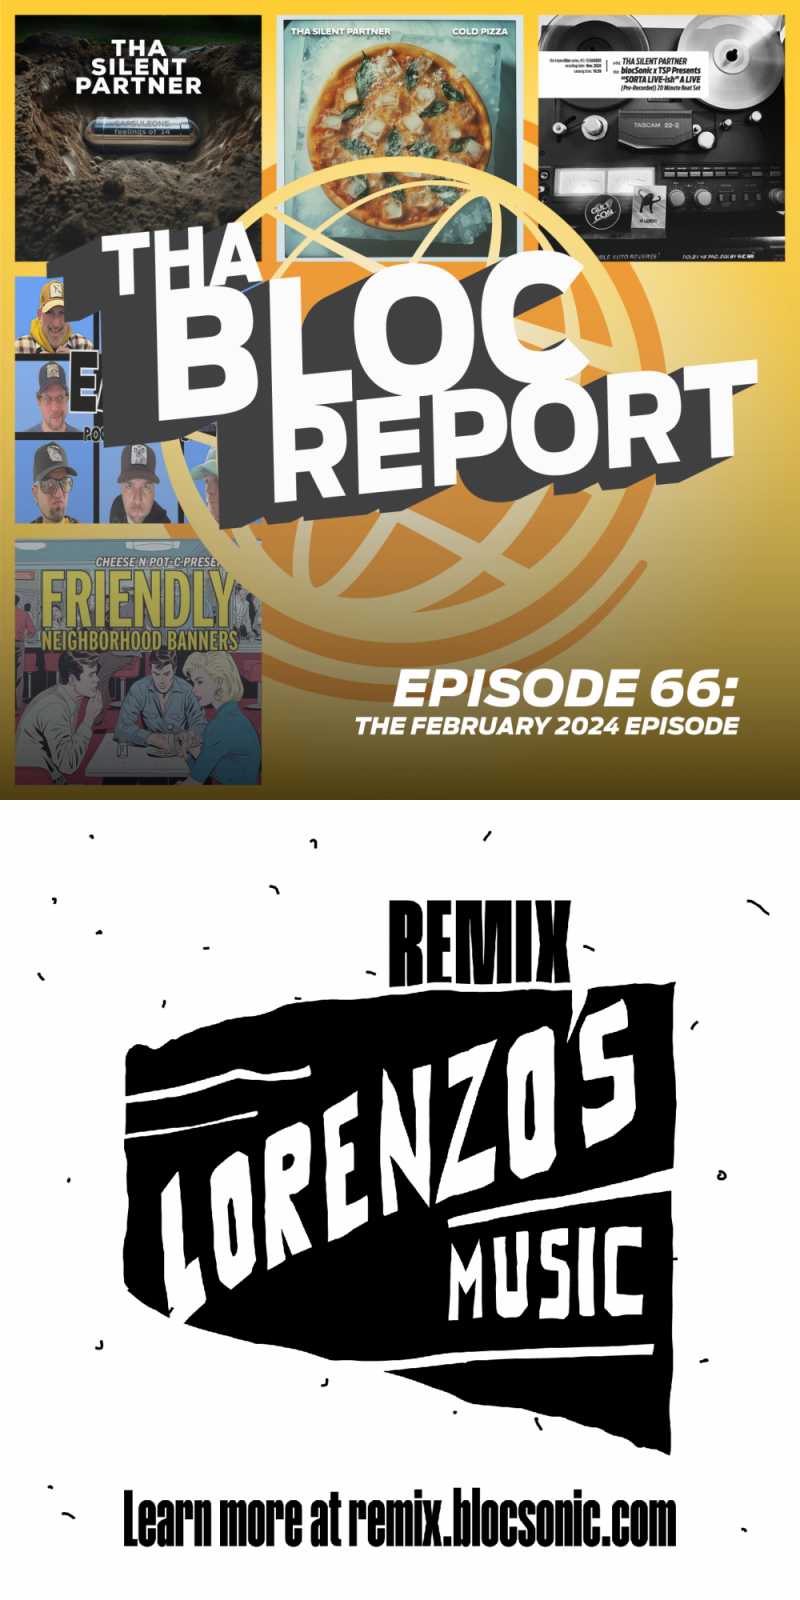 Cover of Tha Bloc Report February 2024 Episode and Promo image for Lorenzo’s Music remix event